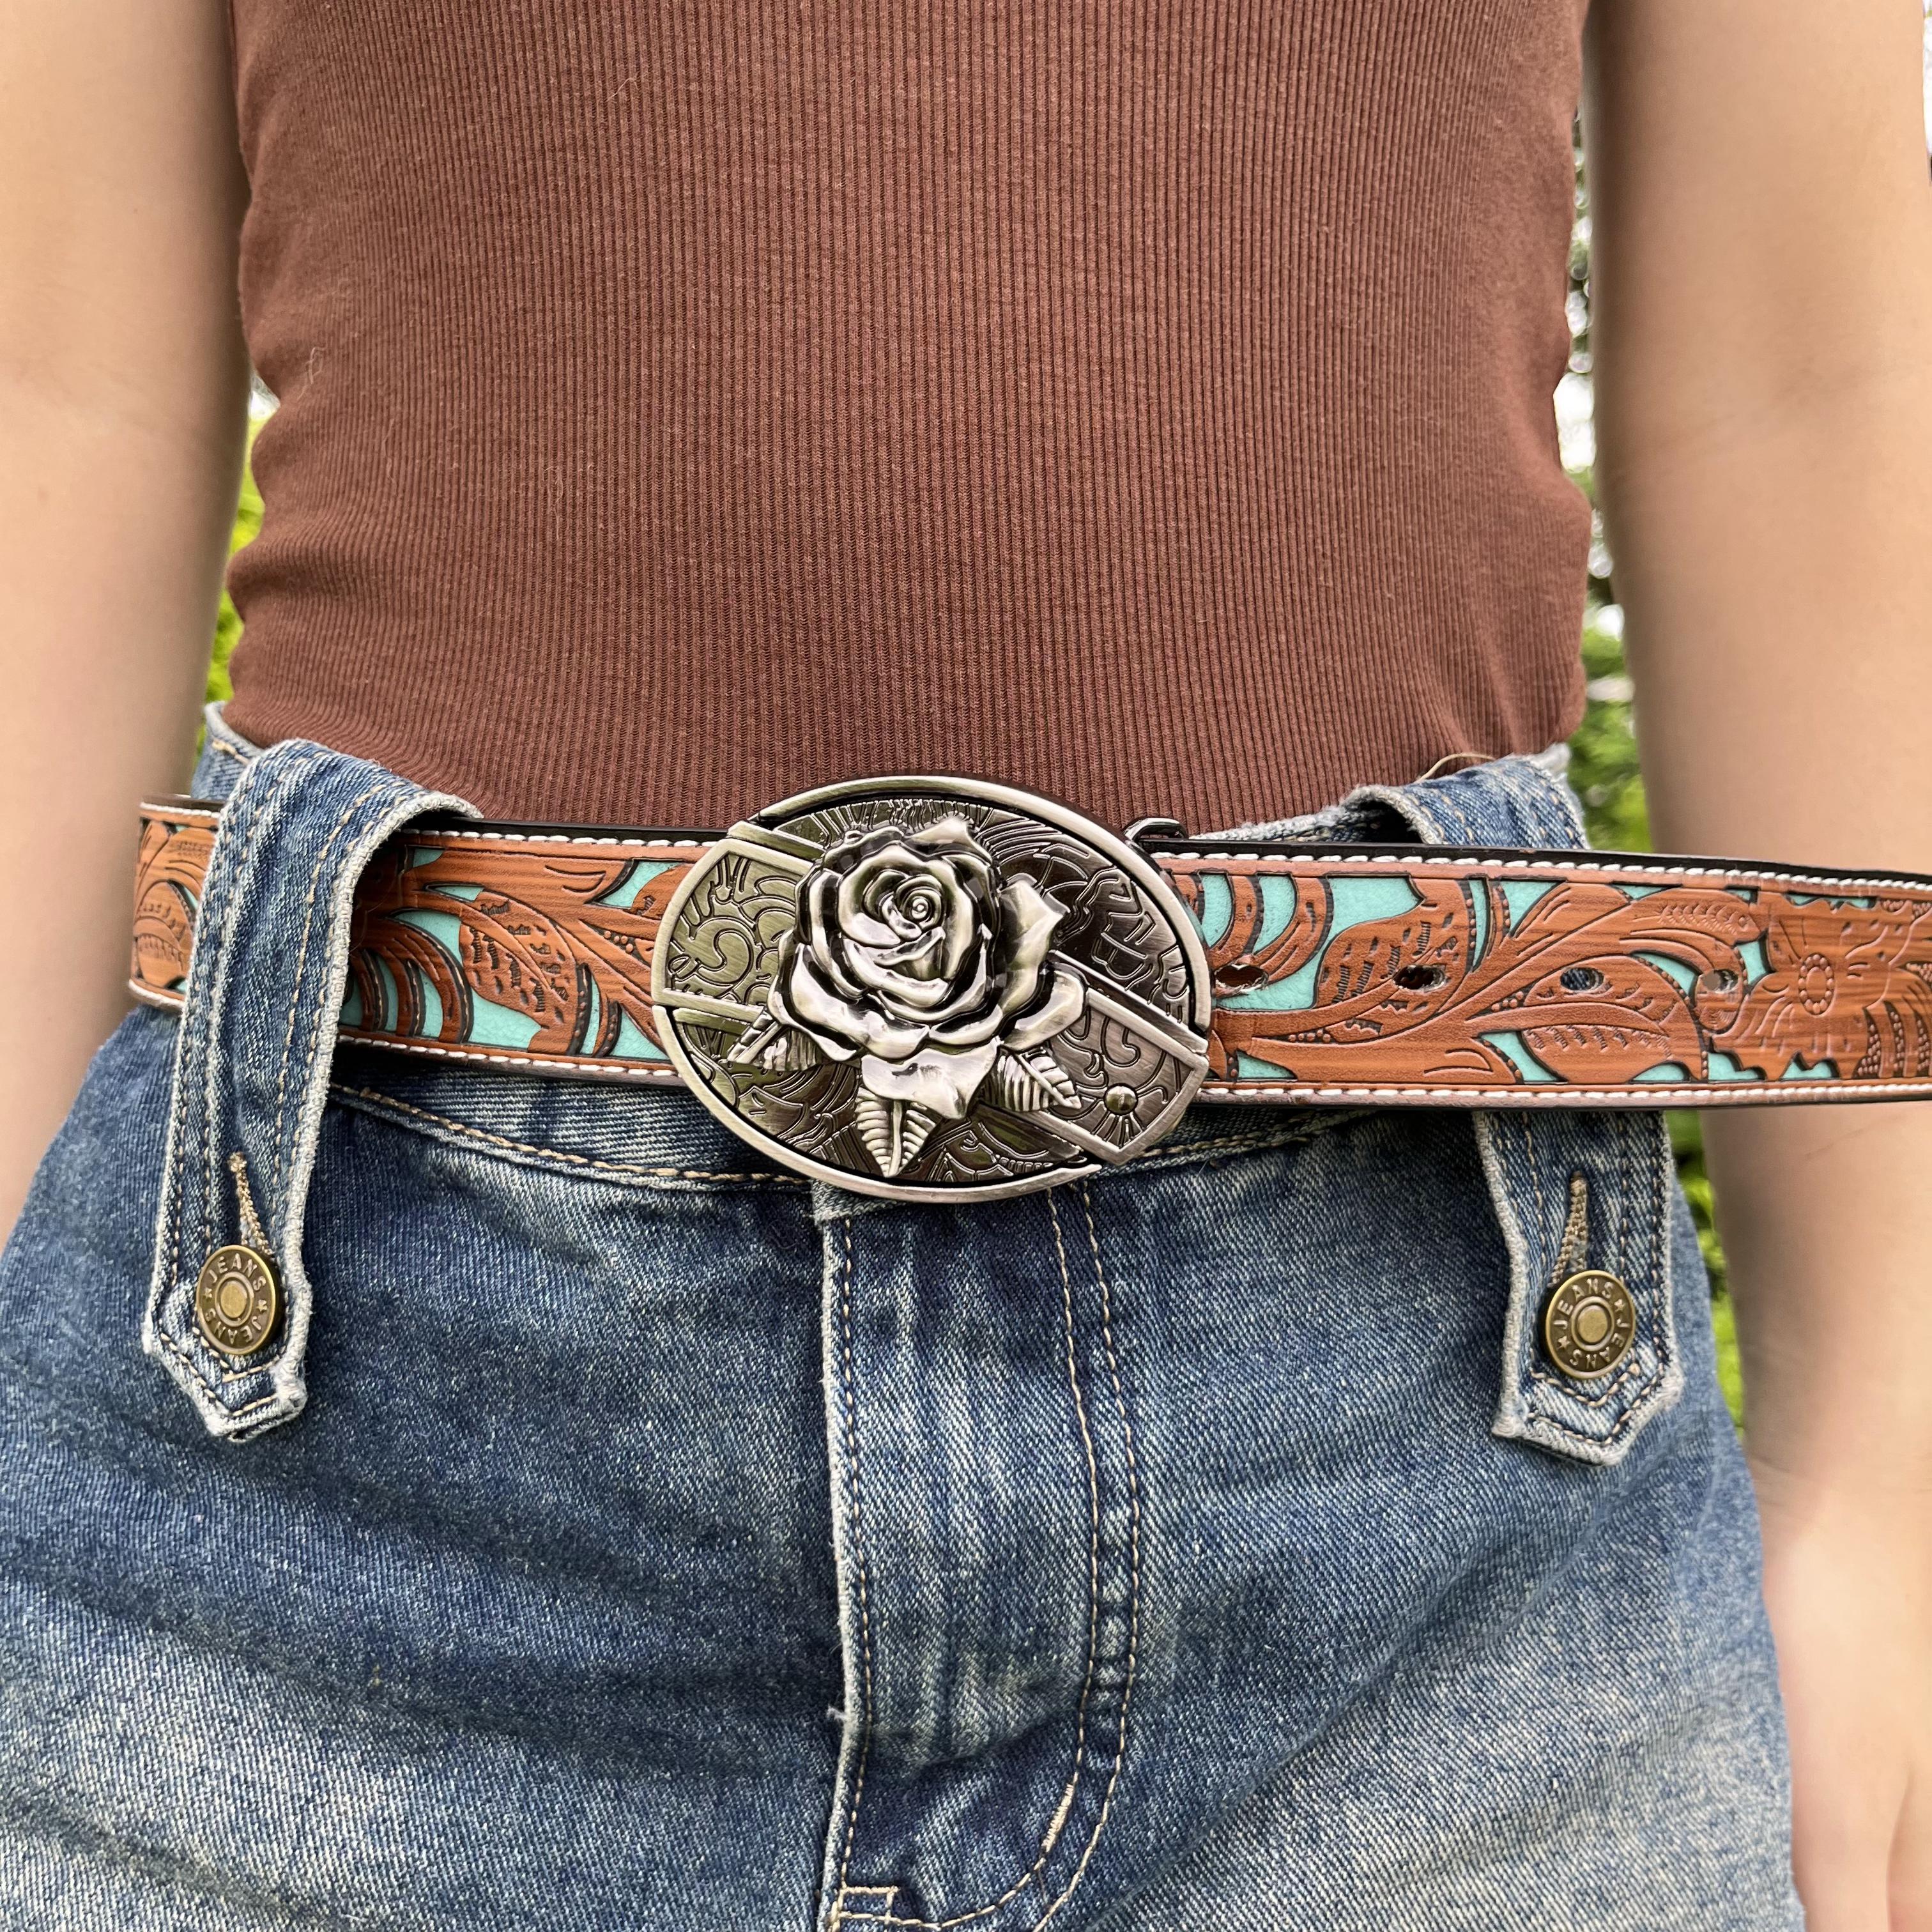 What are the benefits of having a hidden pocket knife belt？